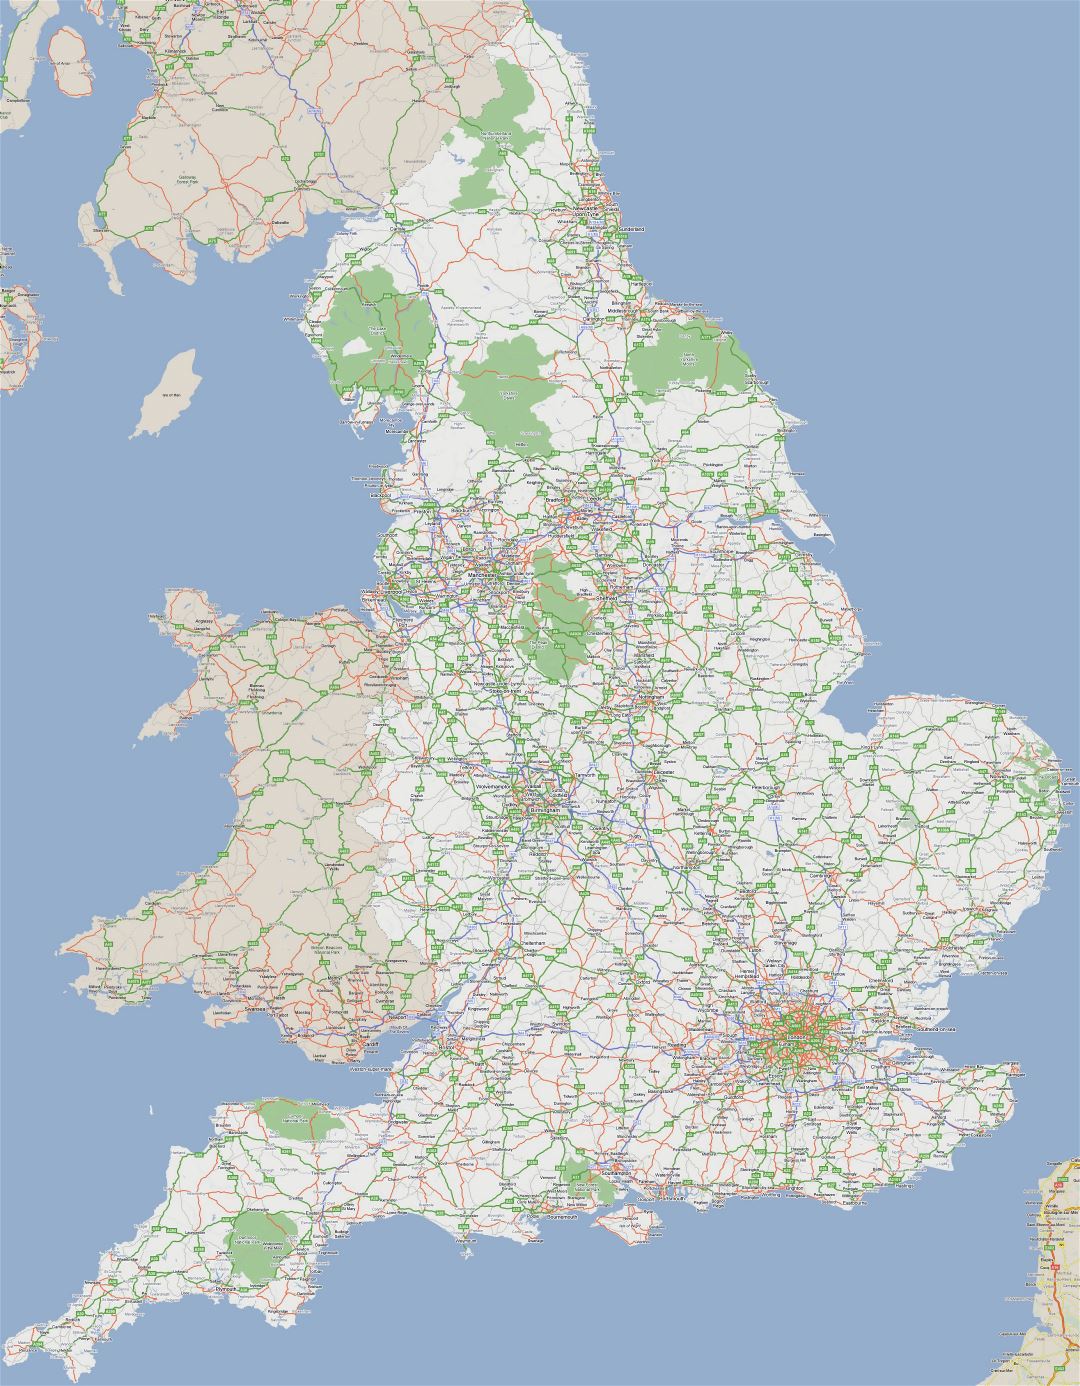 large-road-map-of-england-with-cities-england-united-kingdom